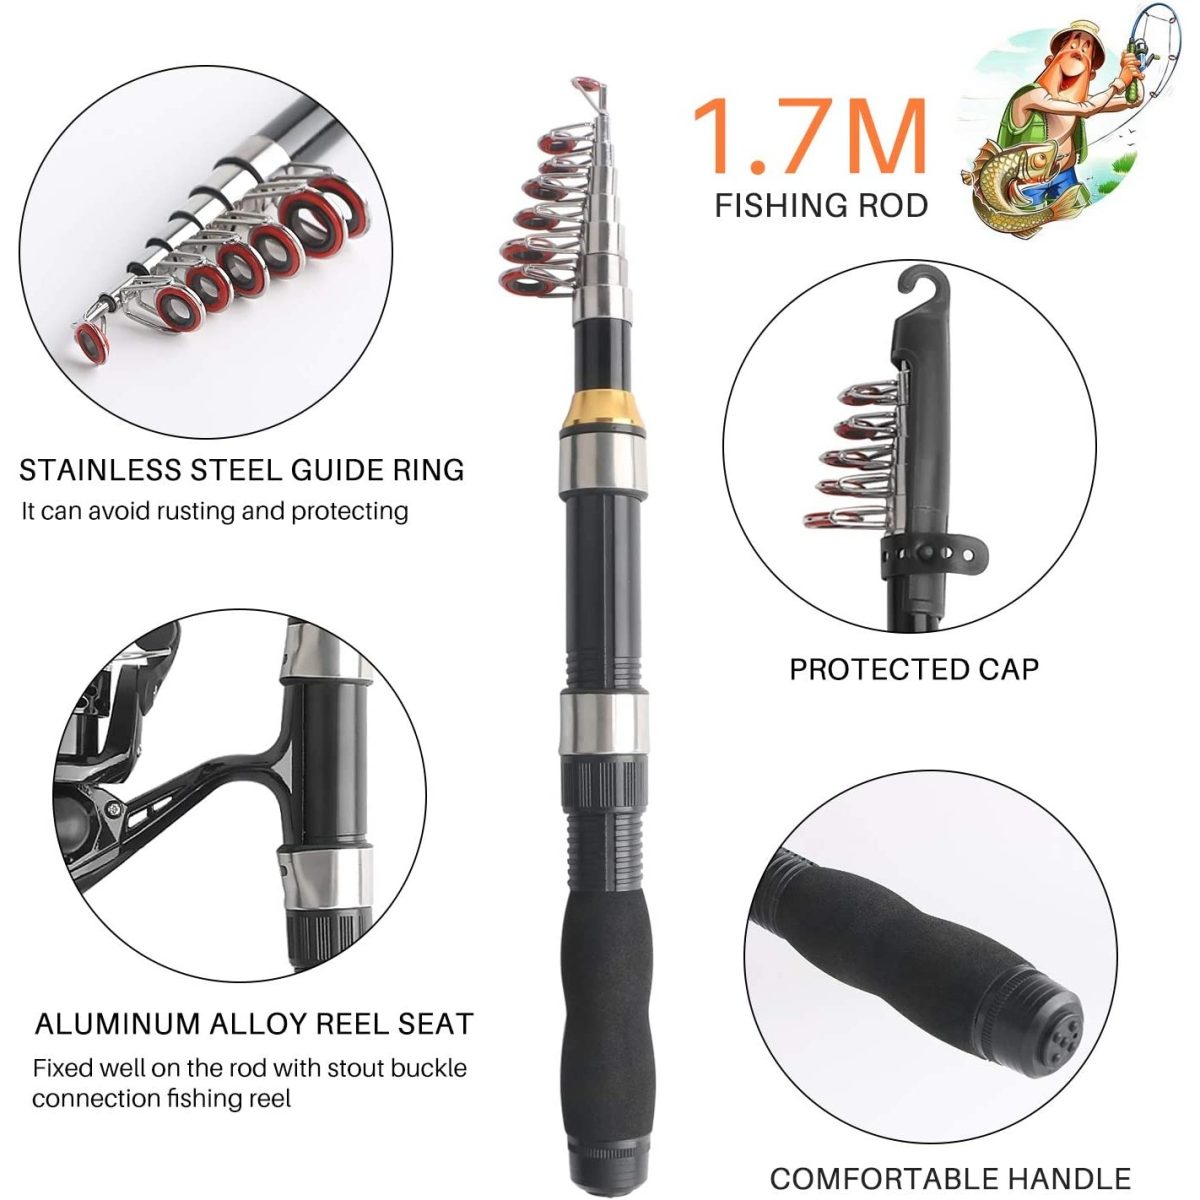 Carbon Fiber Fishing Rod & Reel Complete Kit Set with 5G-5000 Gear Spinning Reel Line, Lures & Bait, Fishing Line, Fishing Tackle & Carrying Bag